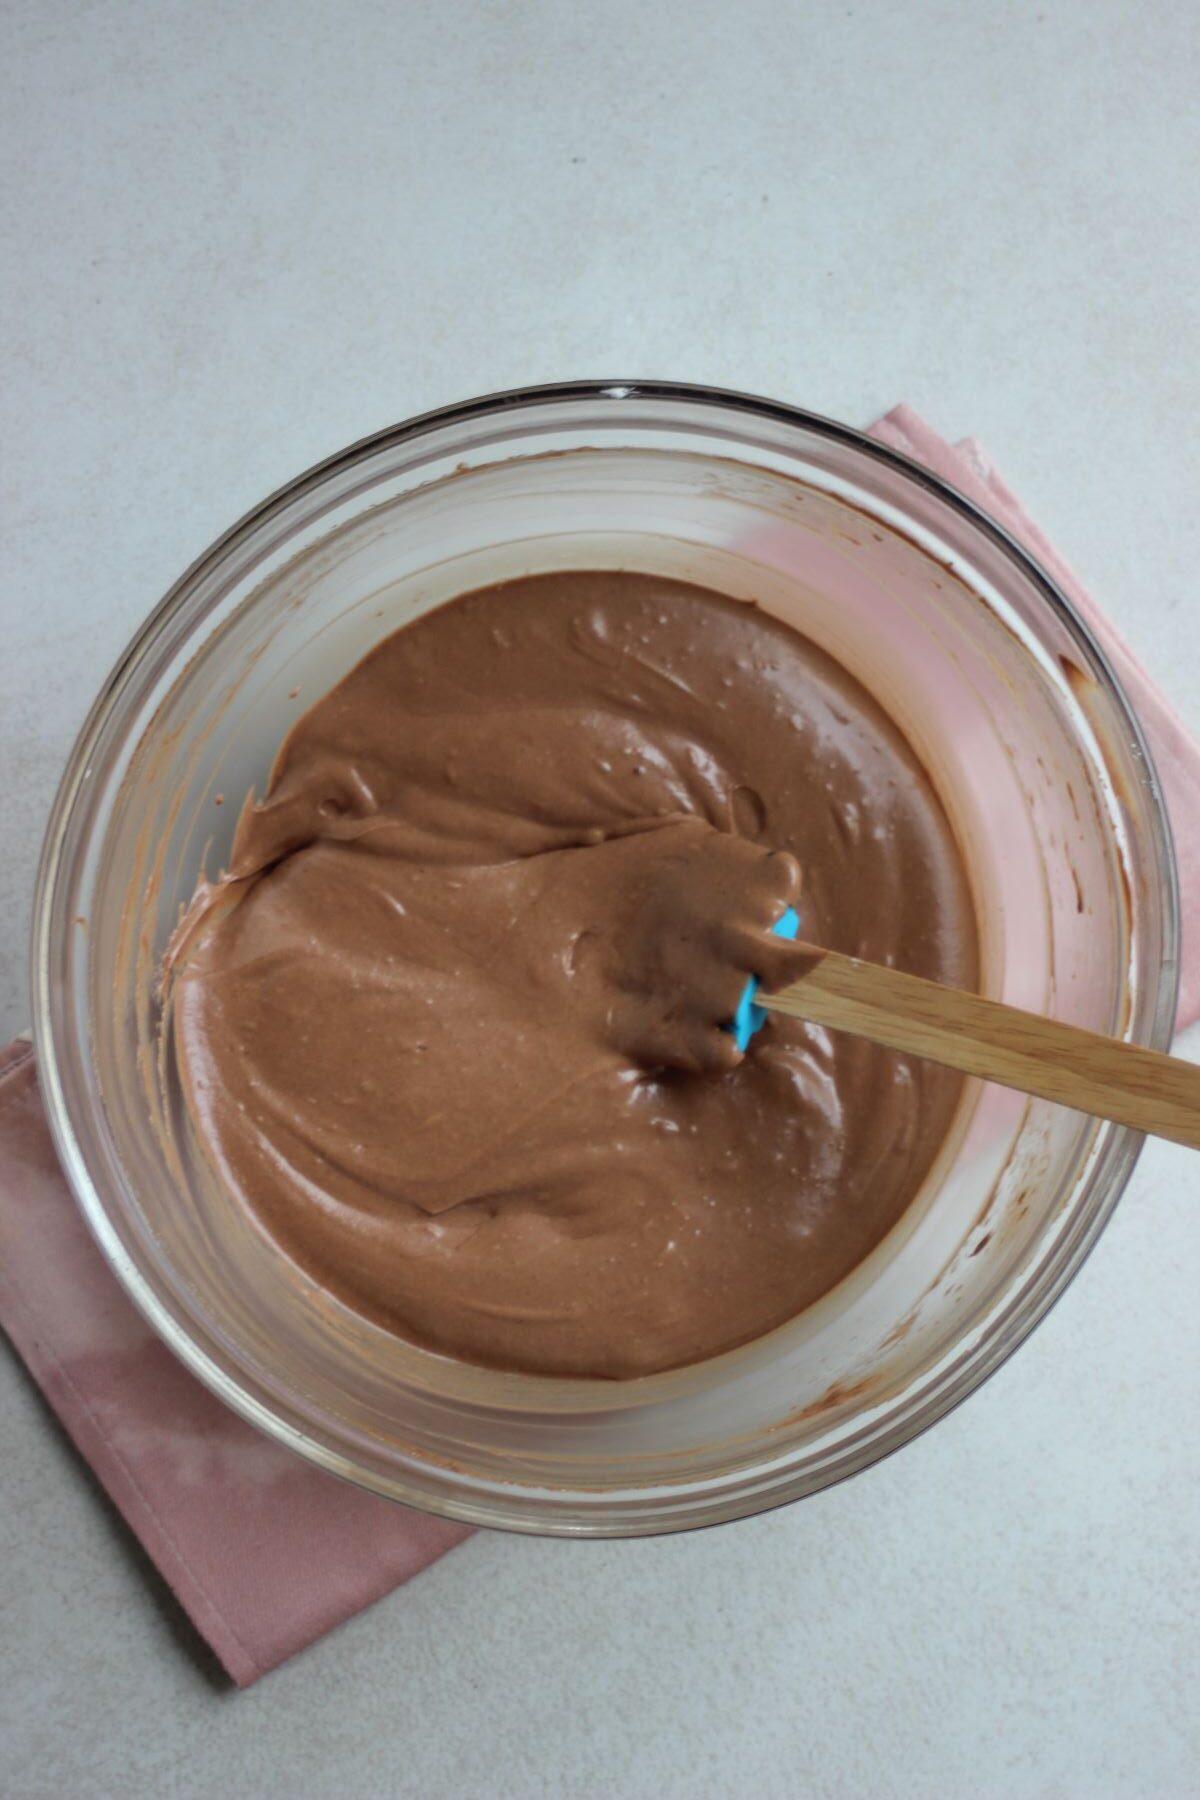 Glass bowl with chocolate mousse and a rubber spatula.